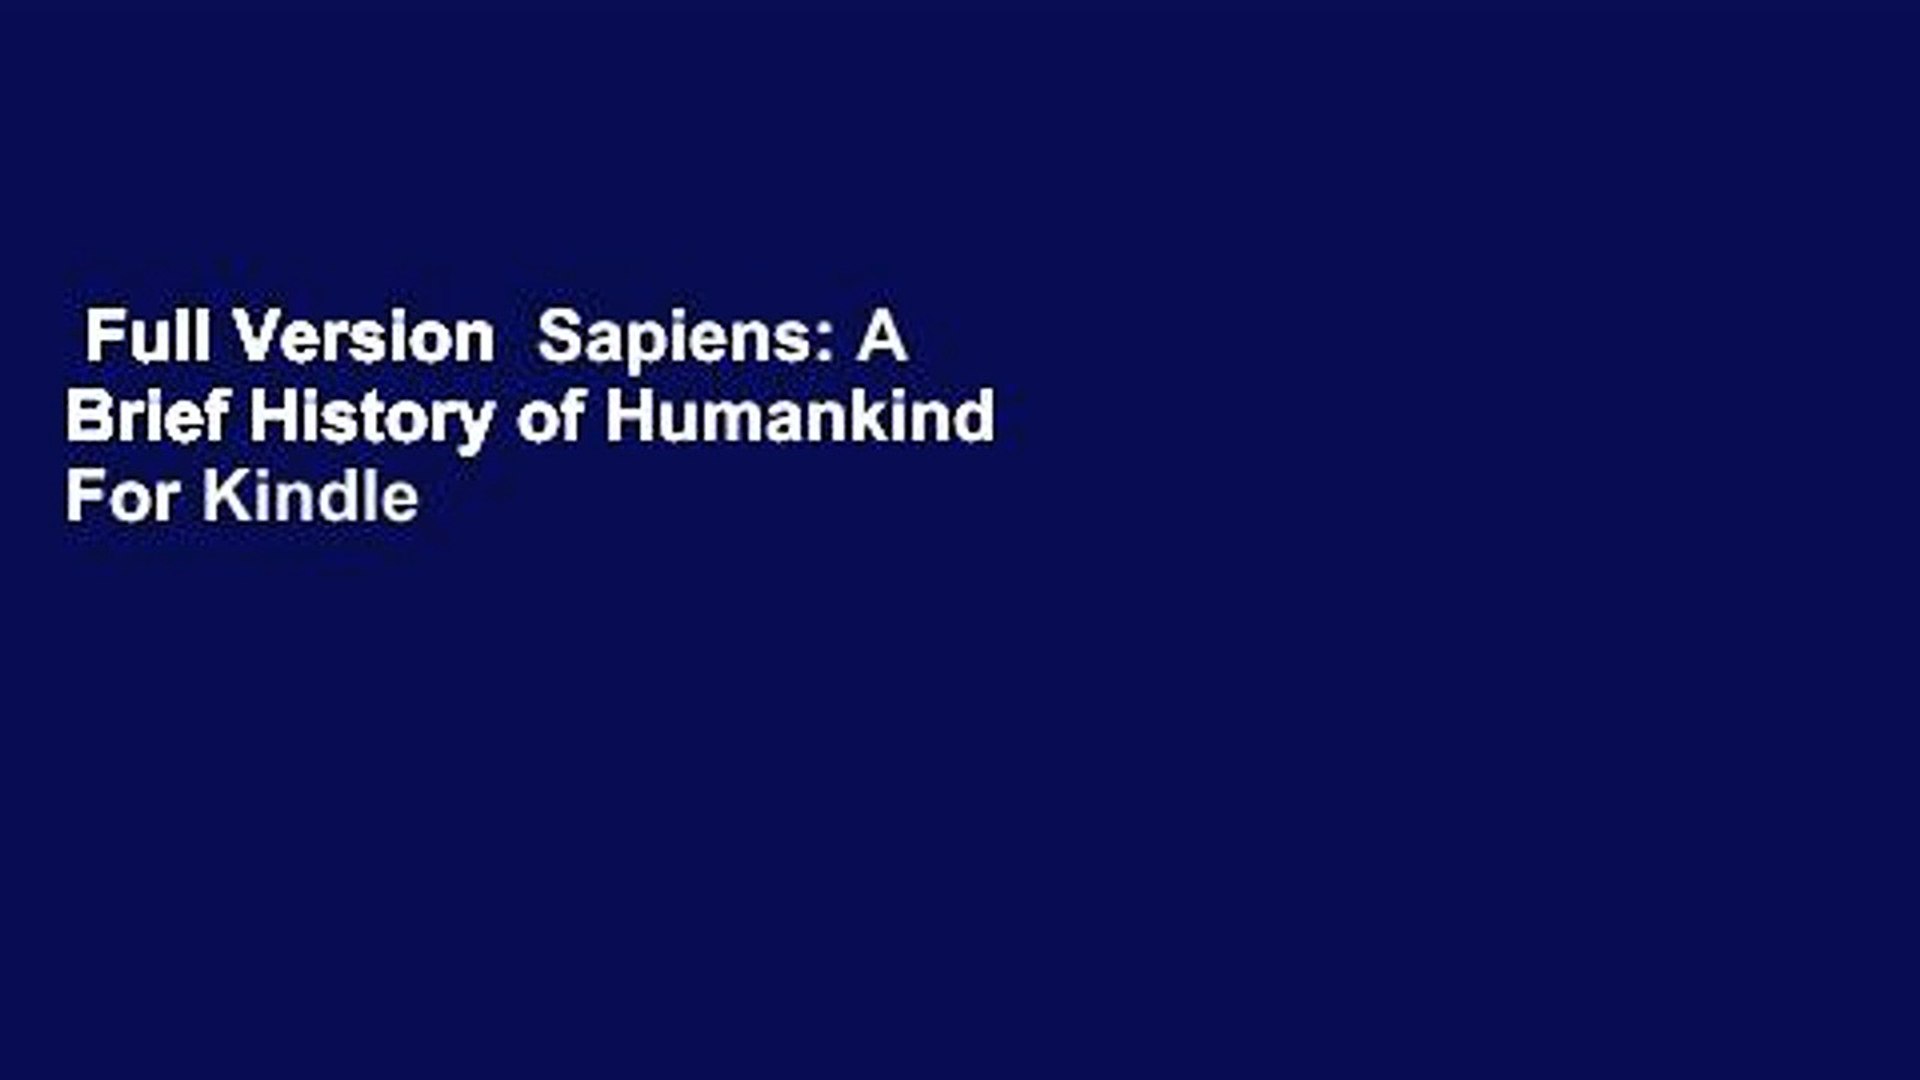 Full Version Sapiens: A Brief History of Humankind For Kindle ...